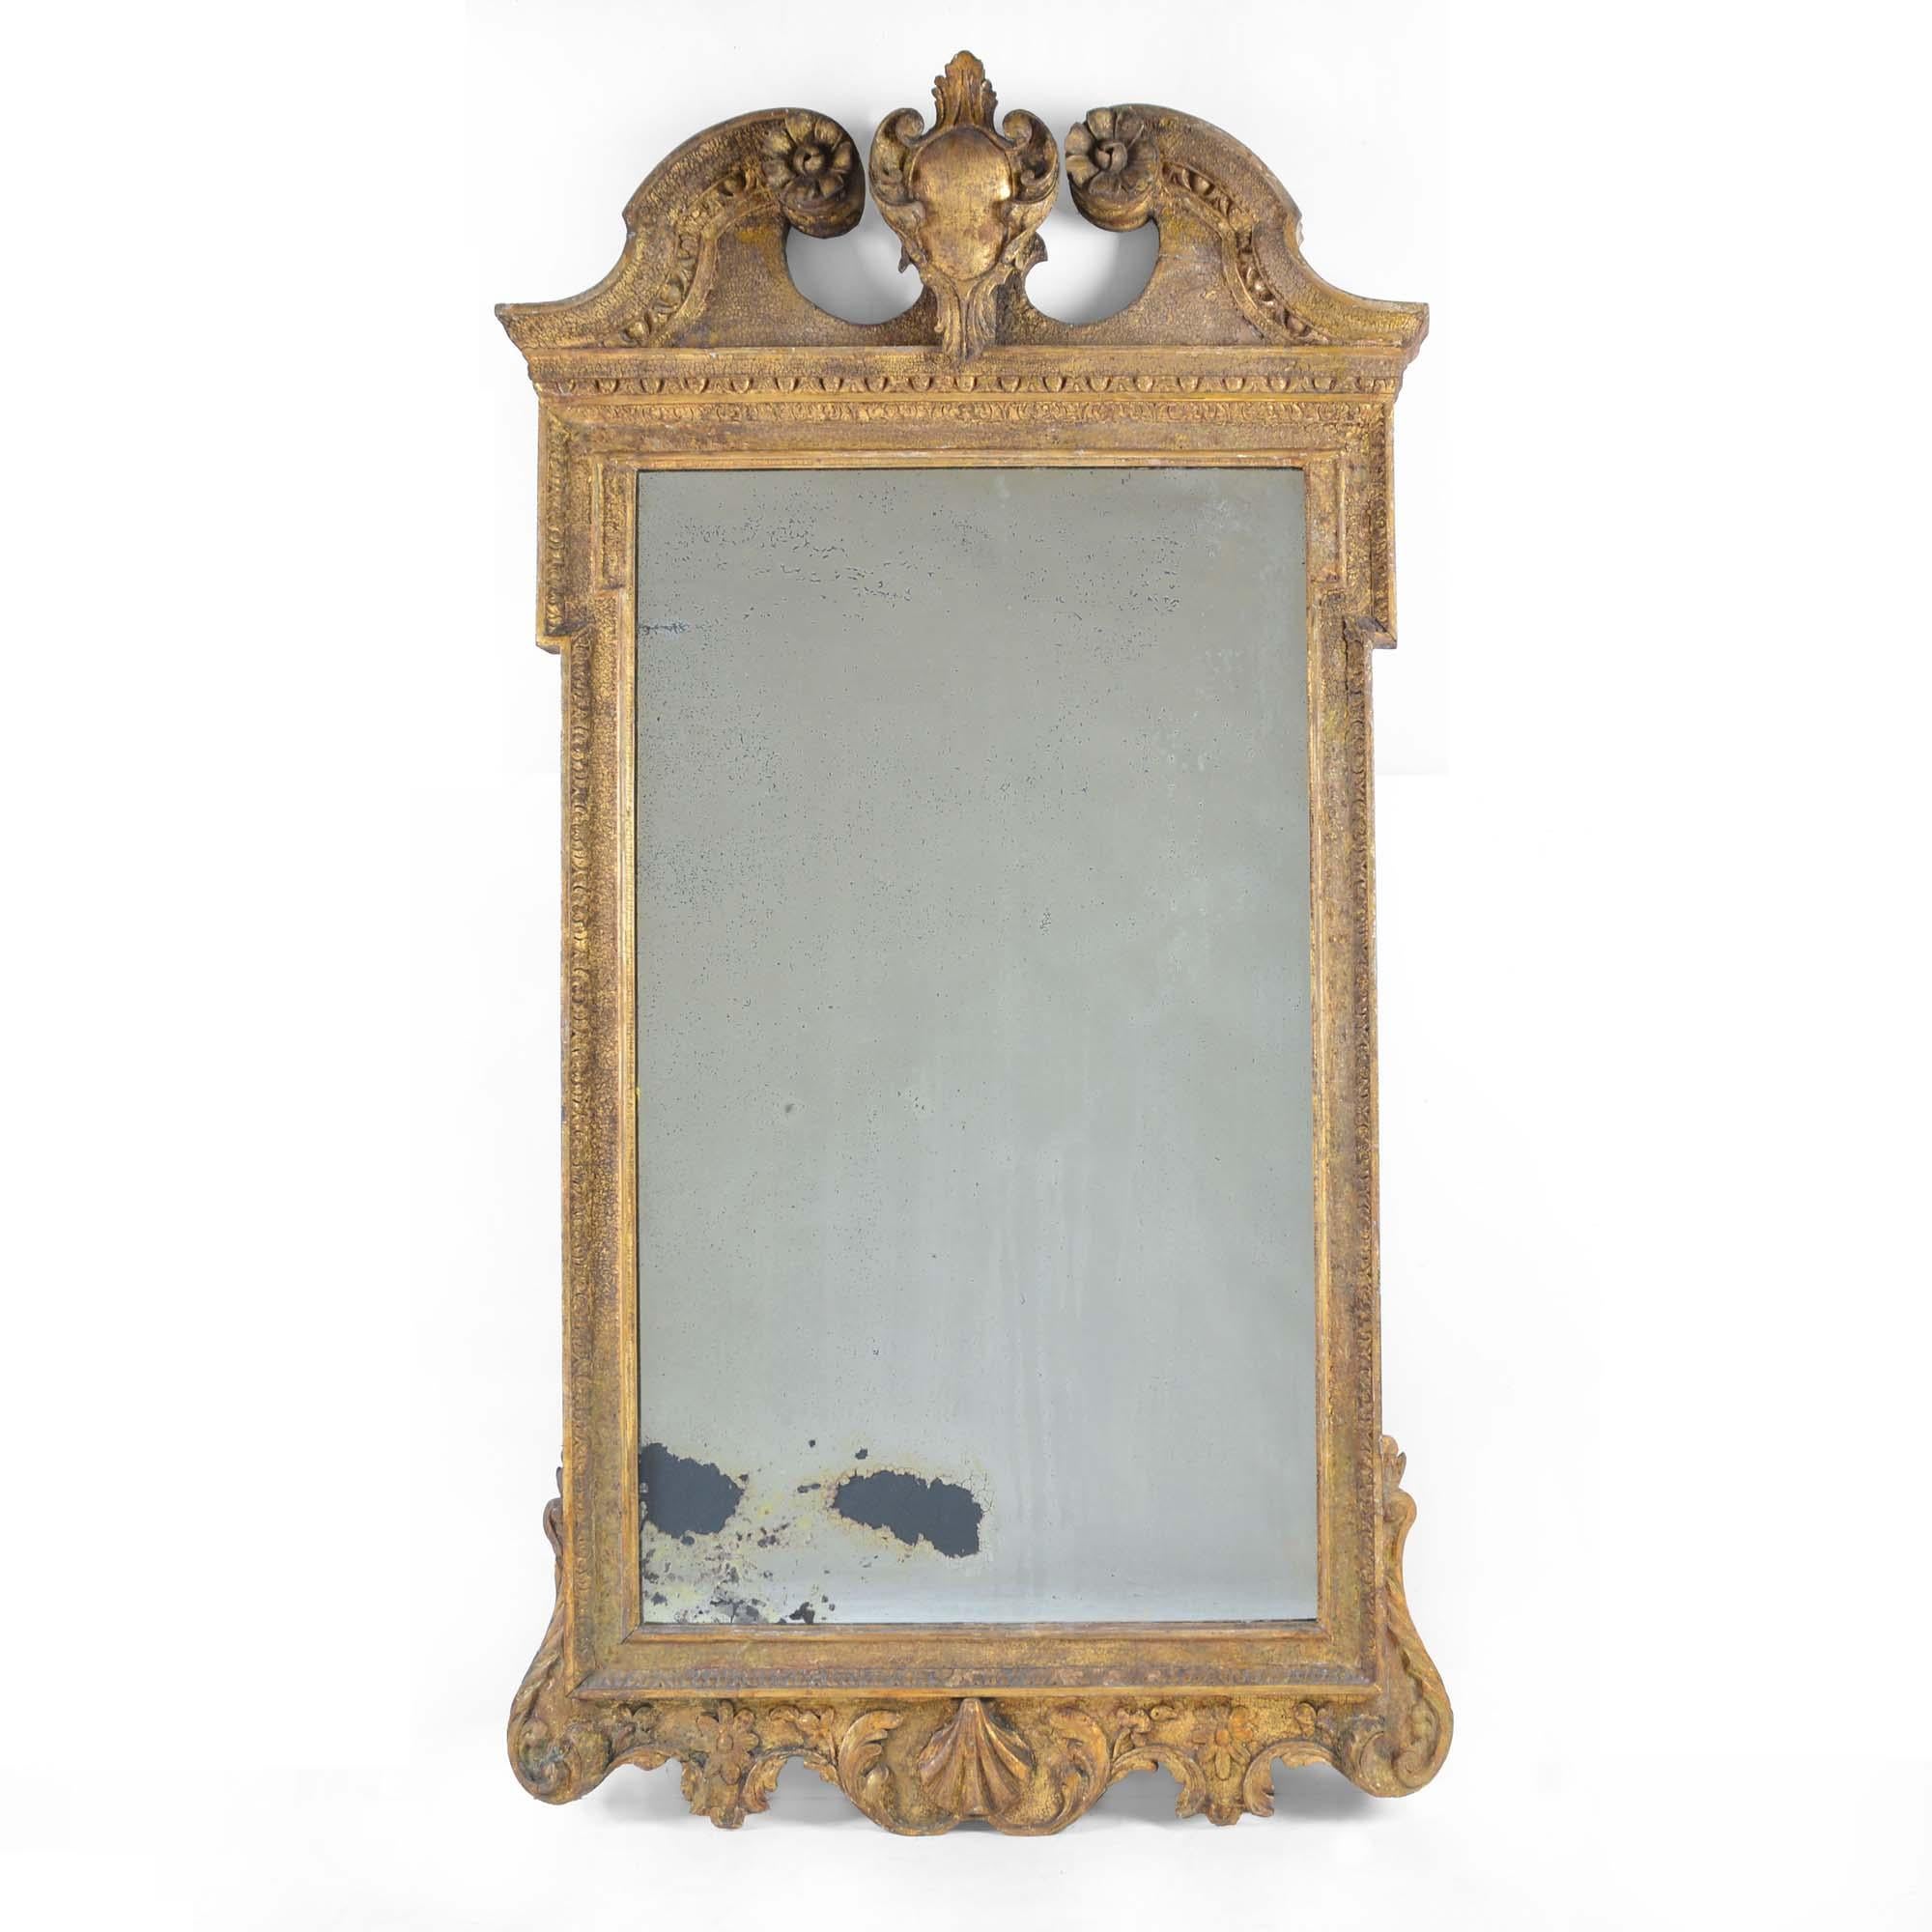 George II carved giltwood mirror with a broken swan-neck pediment centered by a cartouche, the frieze with egg and dart moulding. The original mirror plate with some foxing to the bottom, within a panelled and sanded surround, the apron with carved